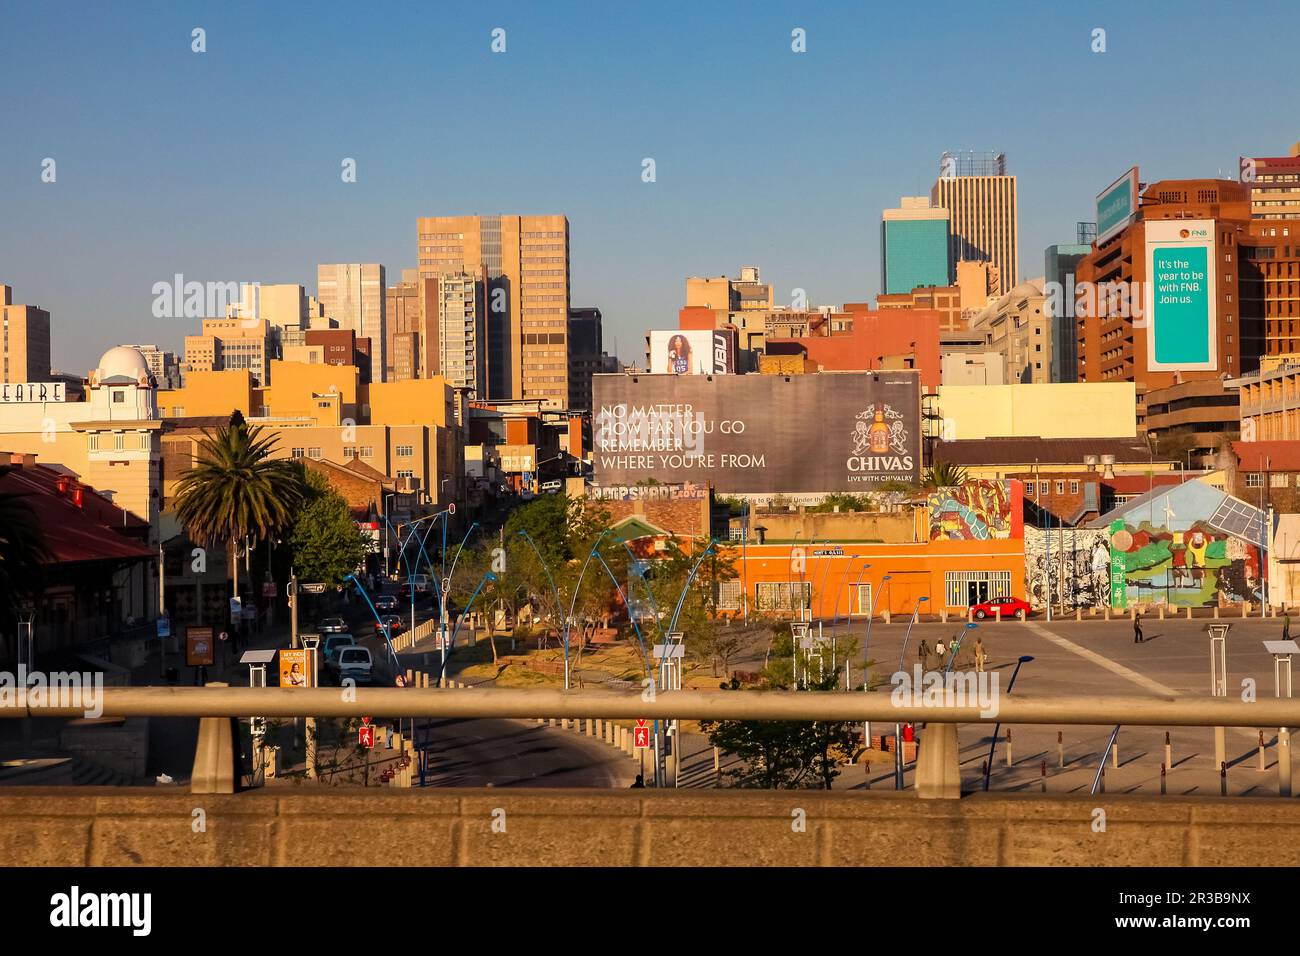 Johannesburg Central Business District buildings and roads Stock Photo